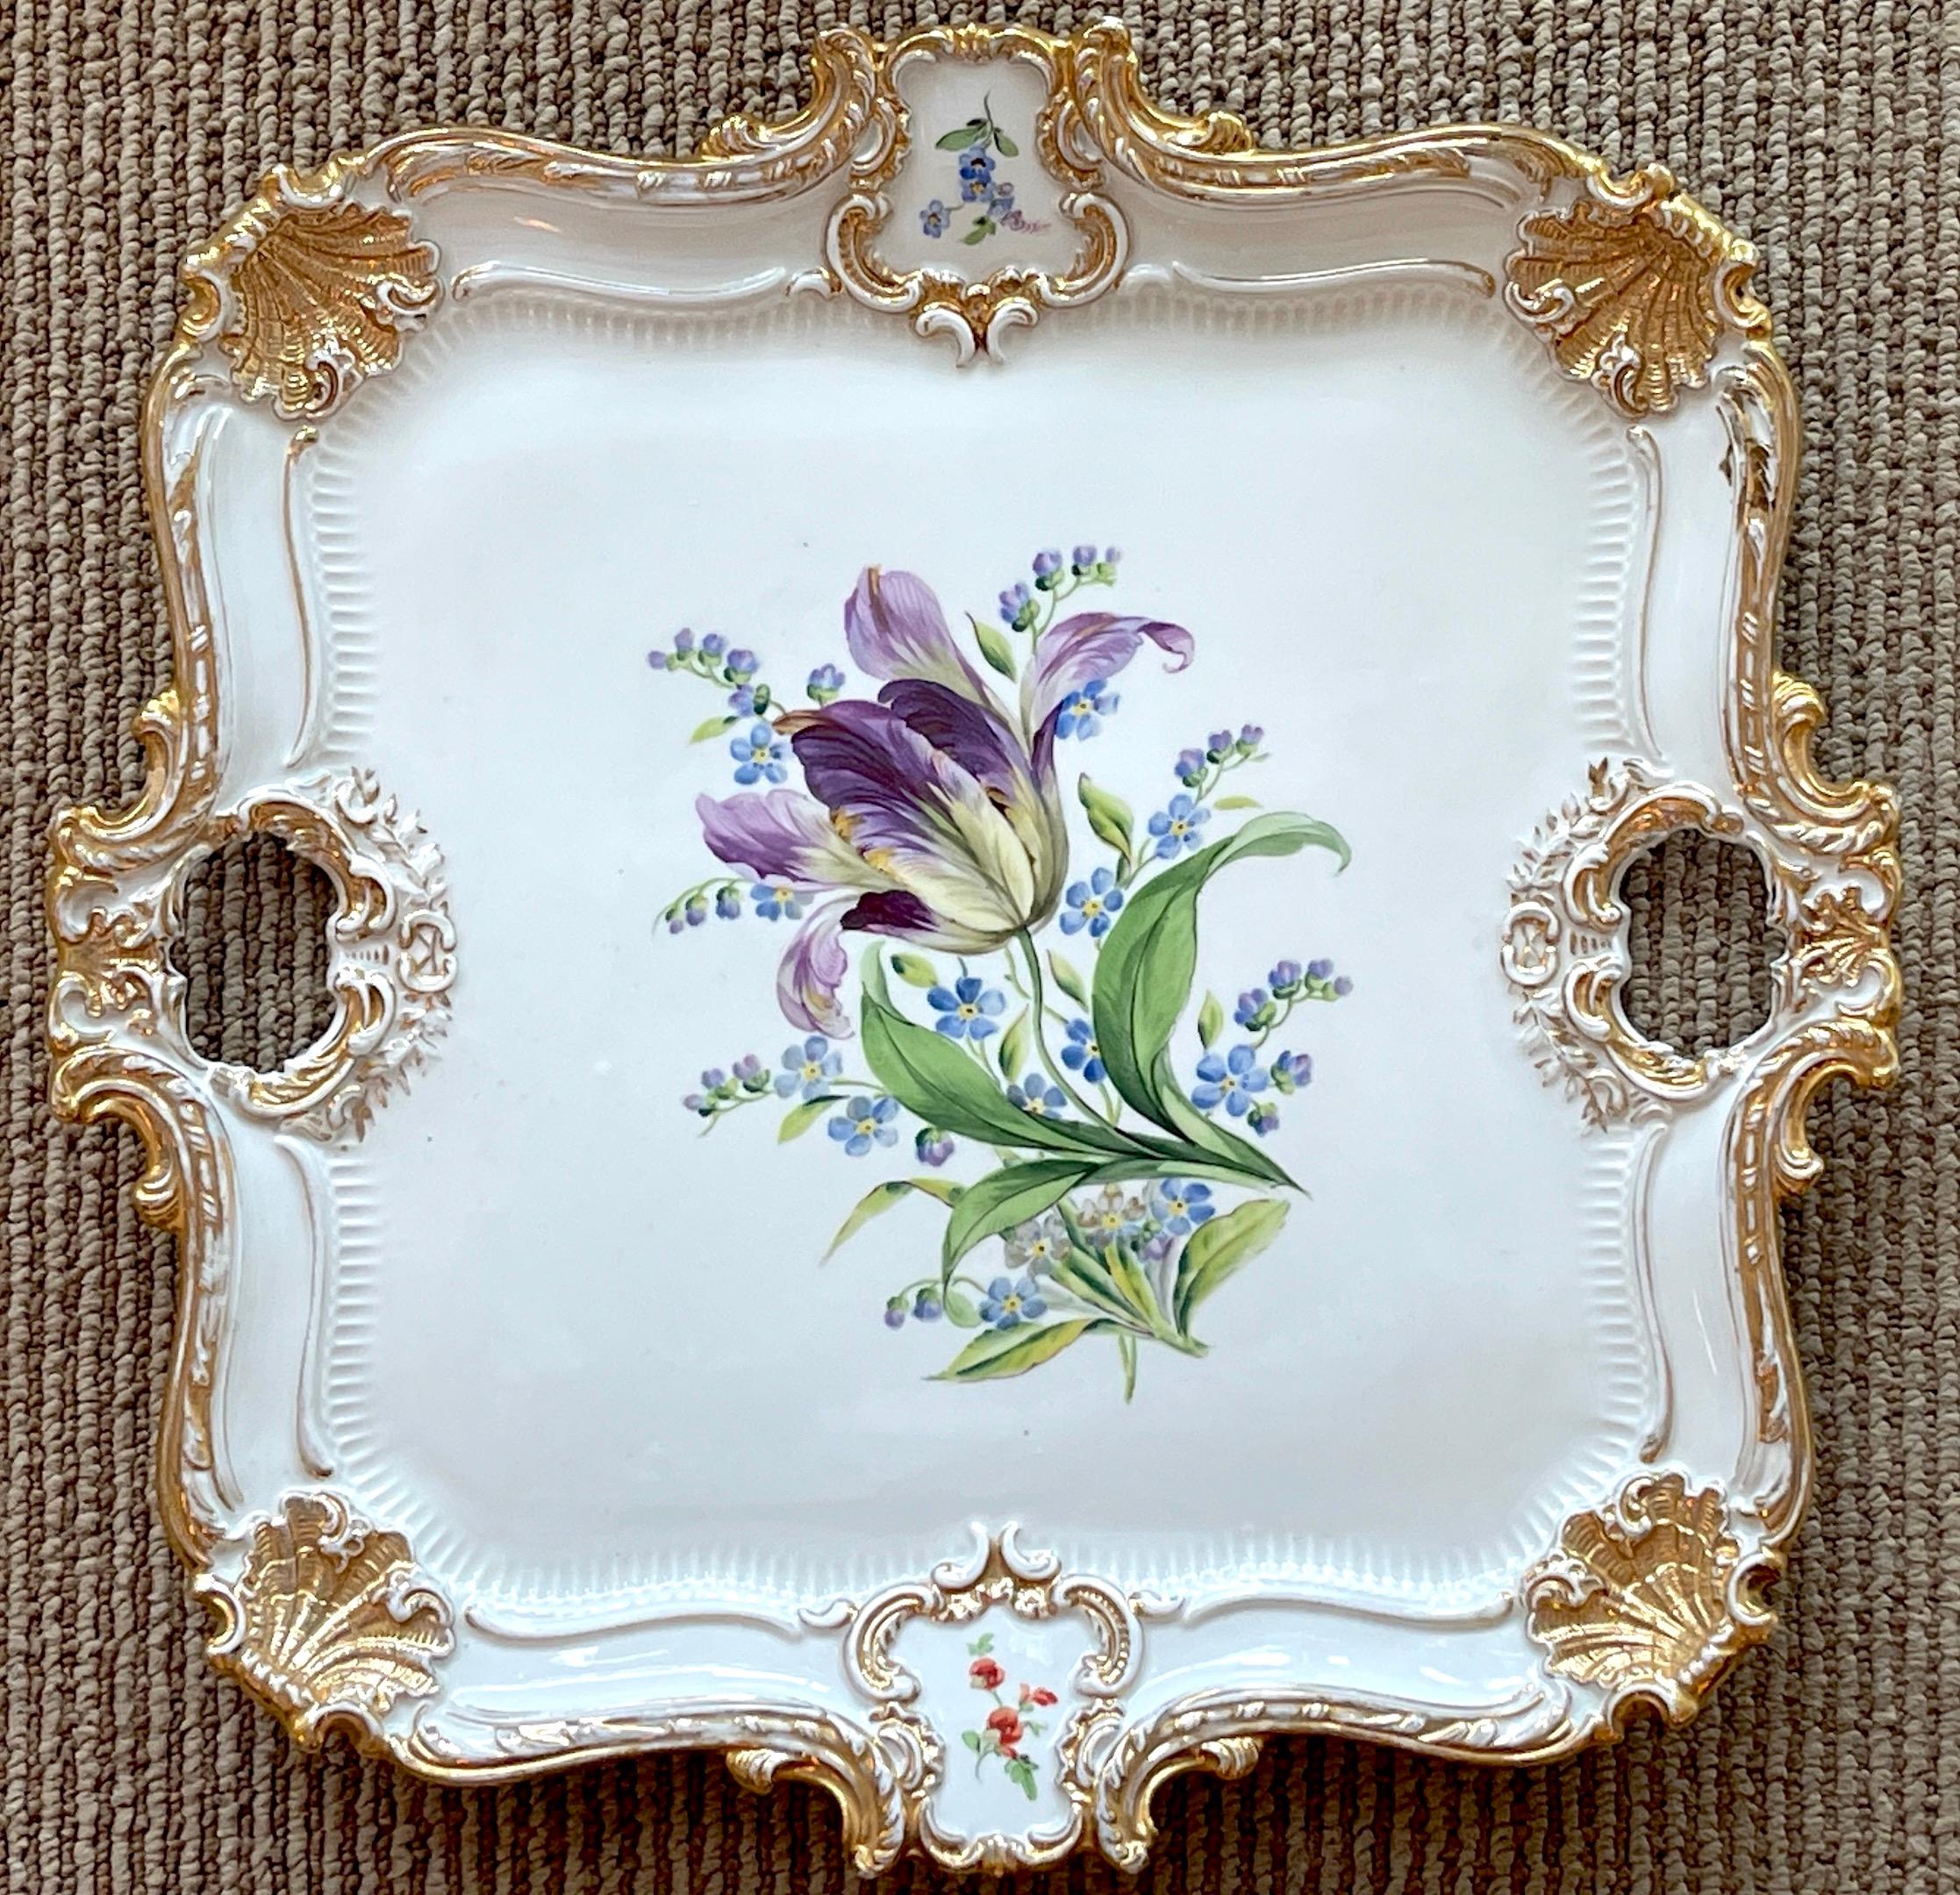 19th C Meissen Tulip Botanical Gilt Tray, Of square form, magnificently decorated with central floral vignette featuring a purple tulip, with gilt highlights with shell corners, and twin handles. Marked with blue crossed swords underglaze with two